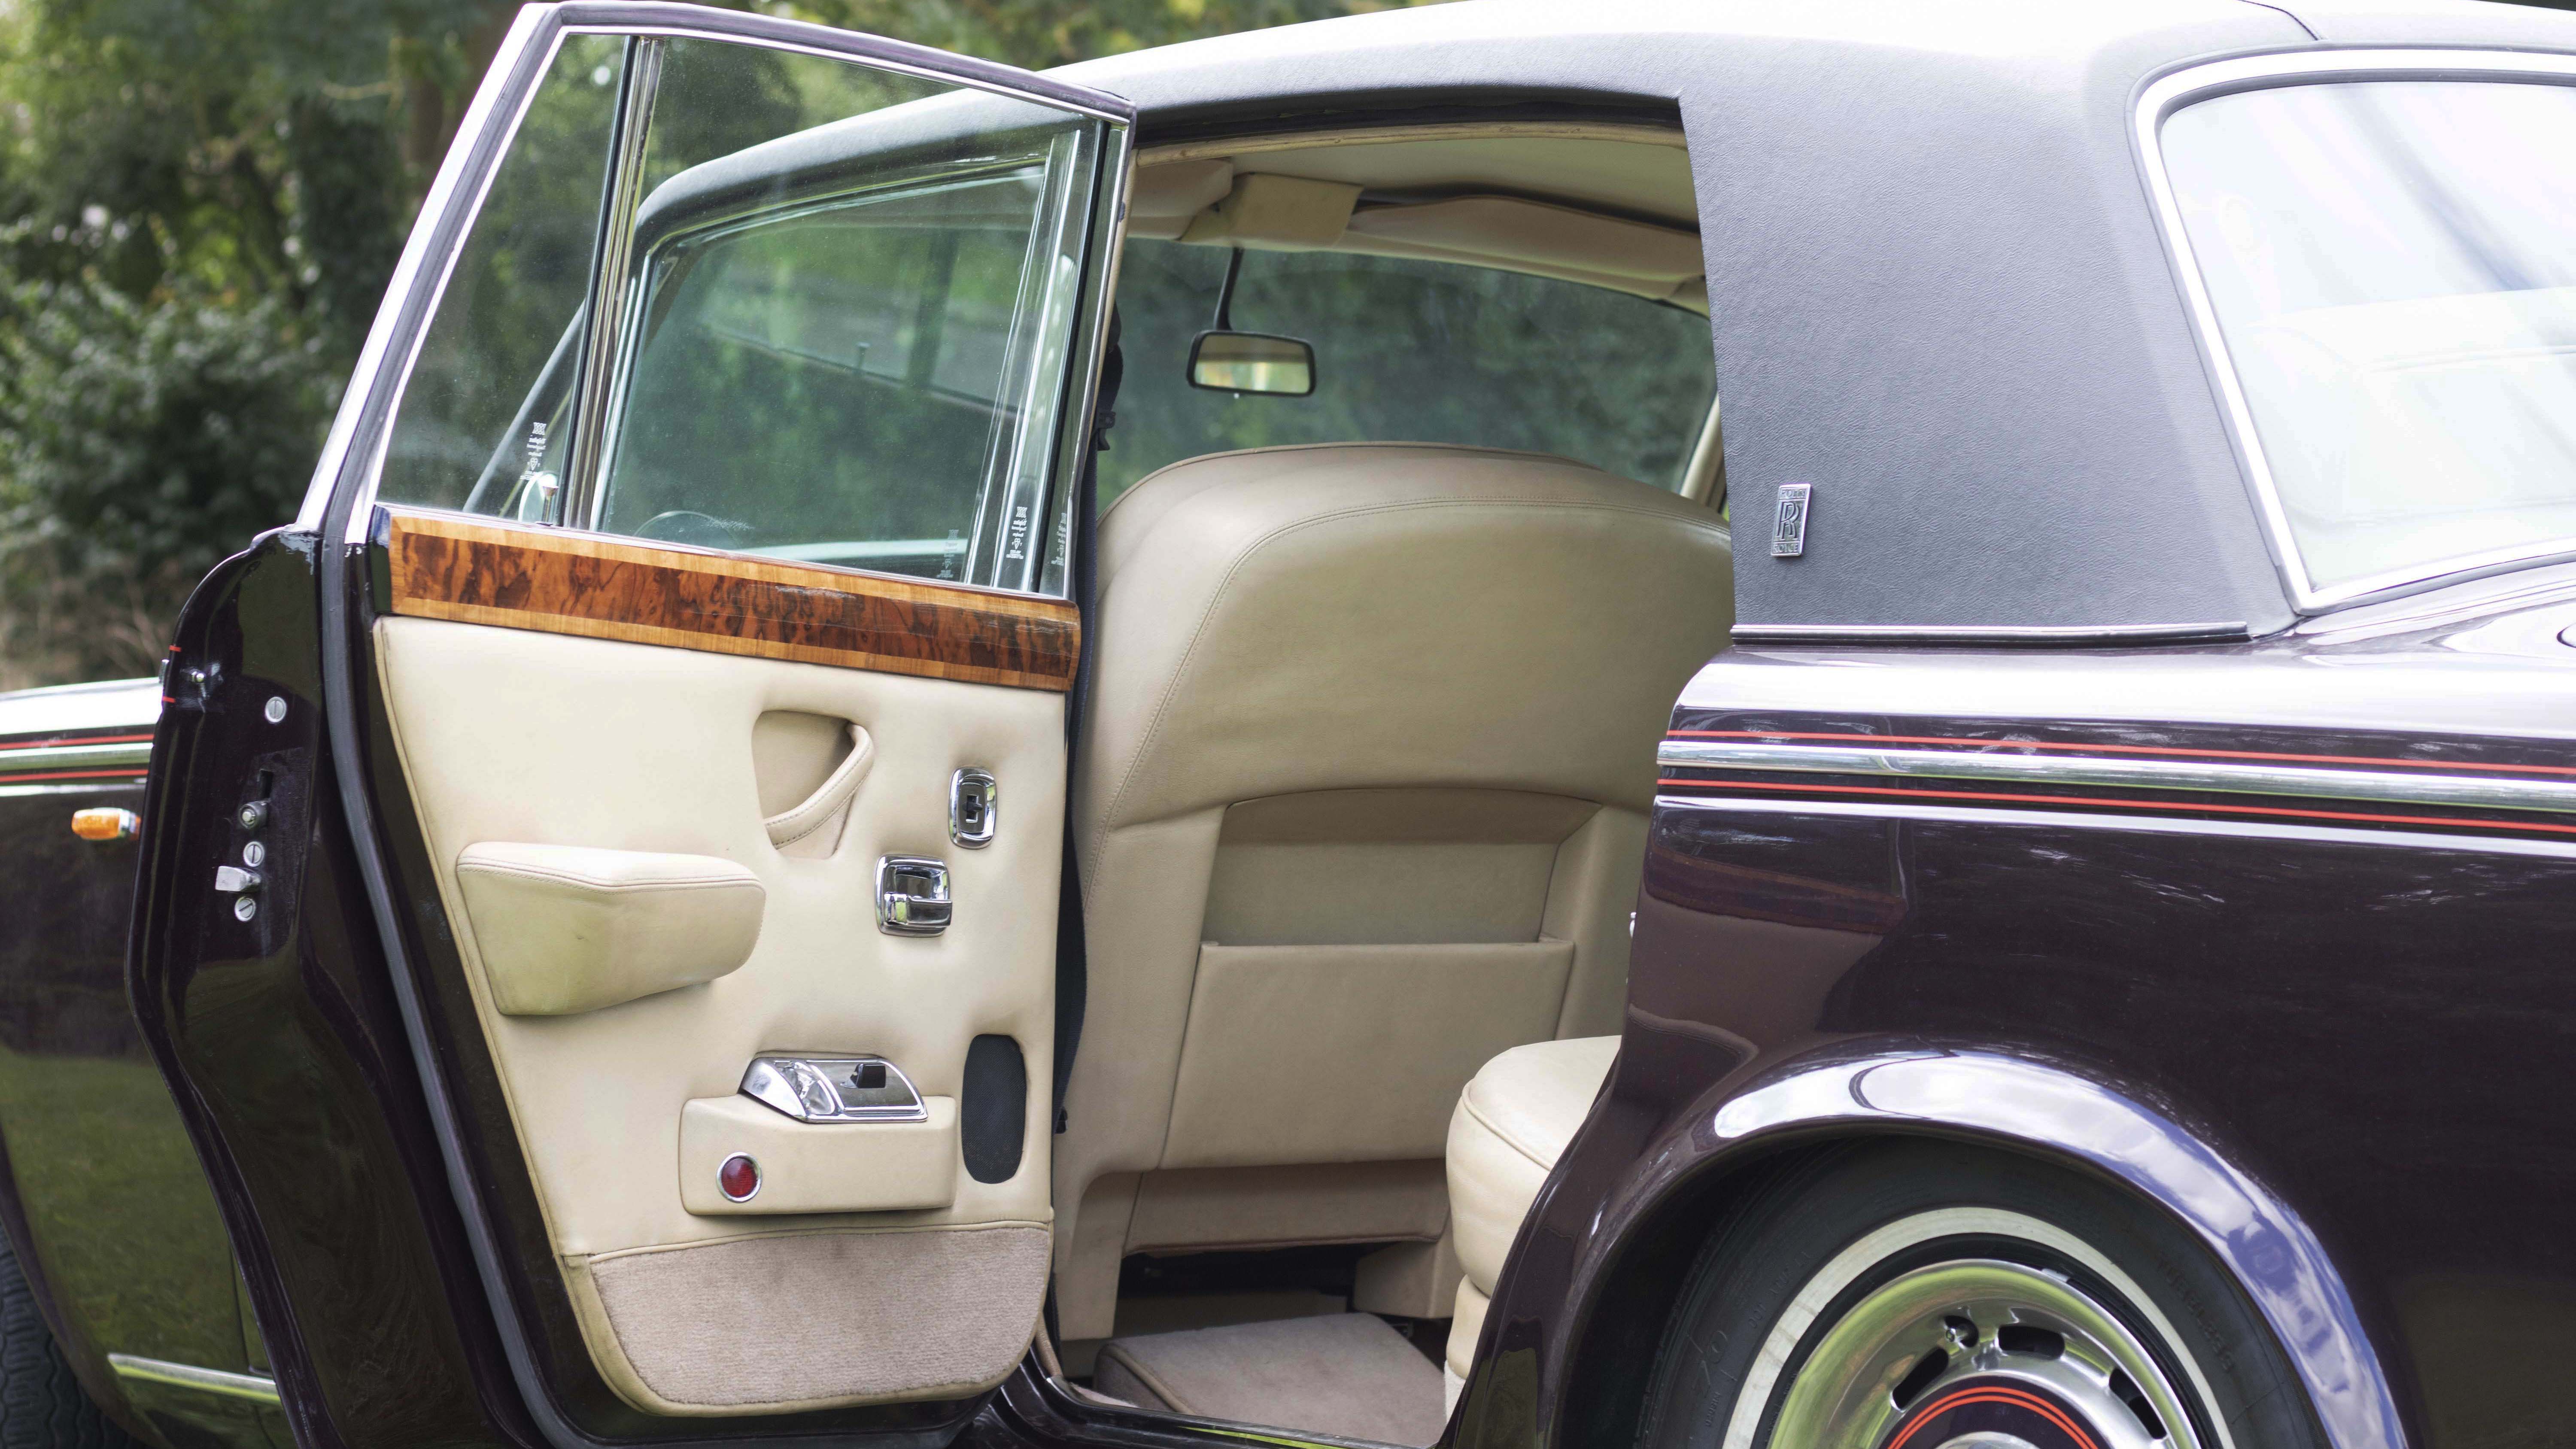 Rear left door open showing large amount of space in the rear. Cream door cards and seats